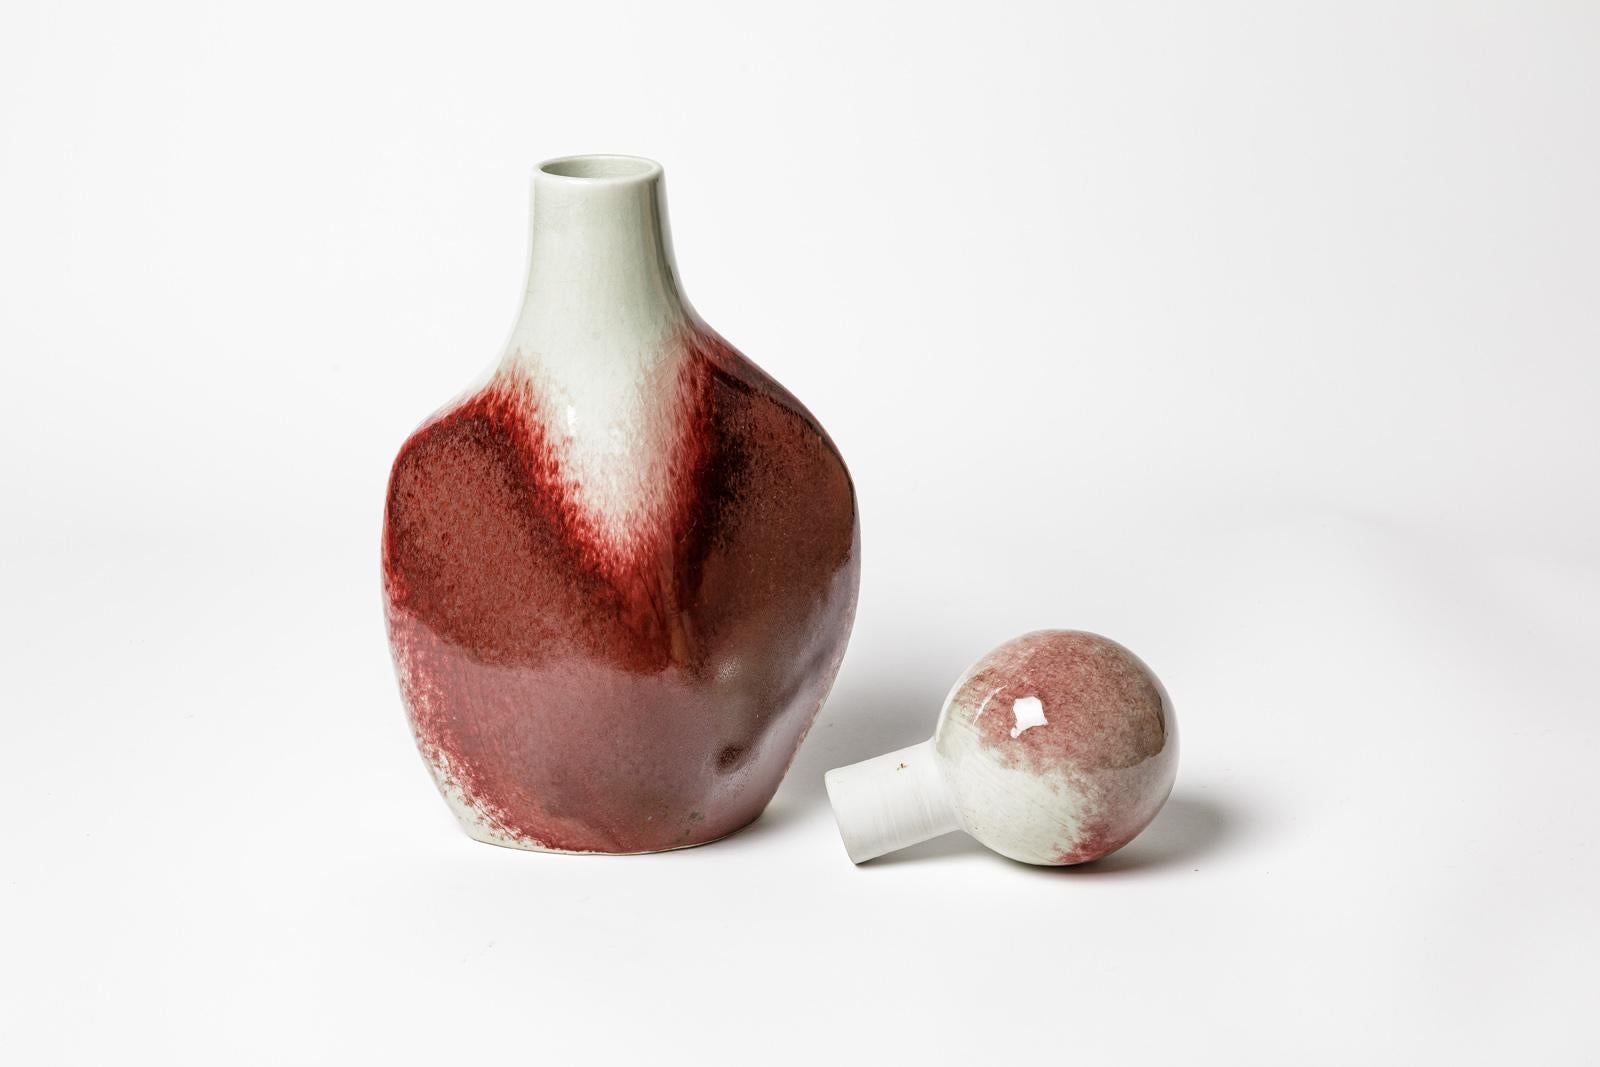 20th Century Red and white porcelain ceramic vase or bottle by Jacqueline and Tim Orr 1970 For Sale